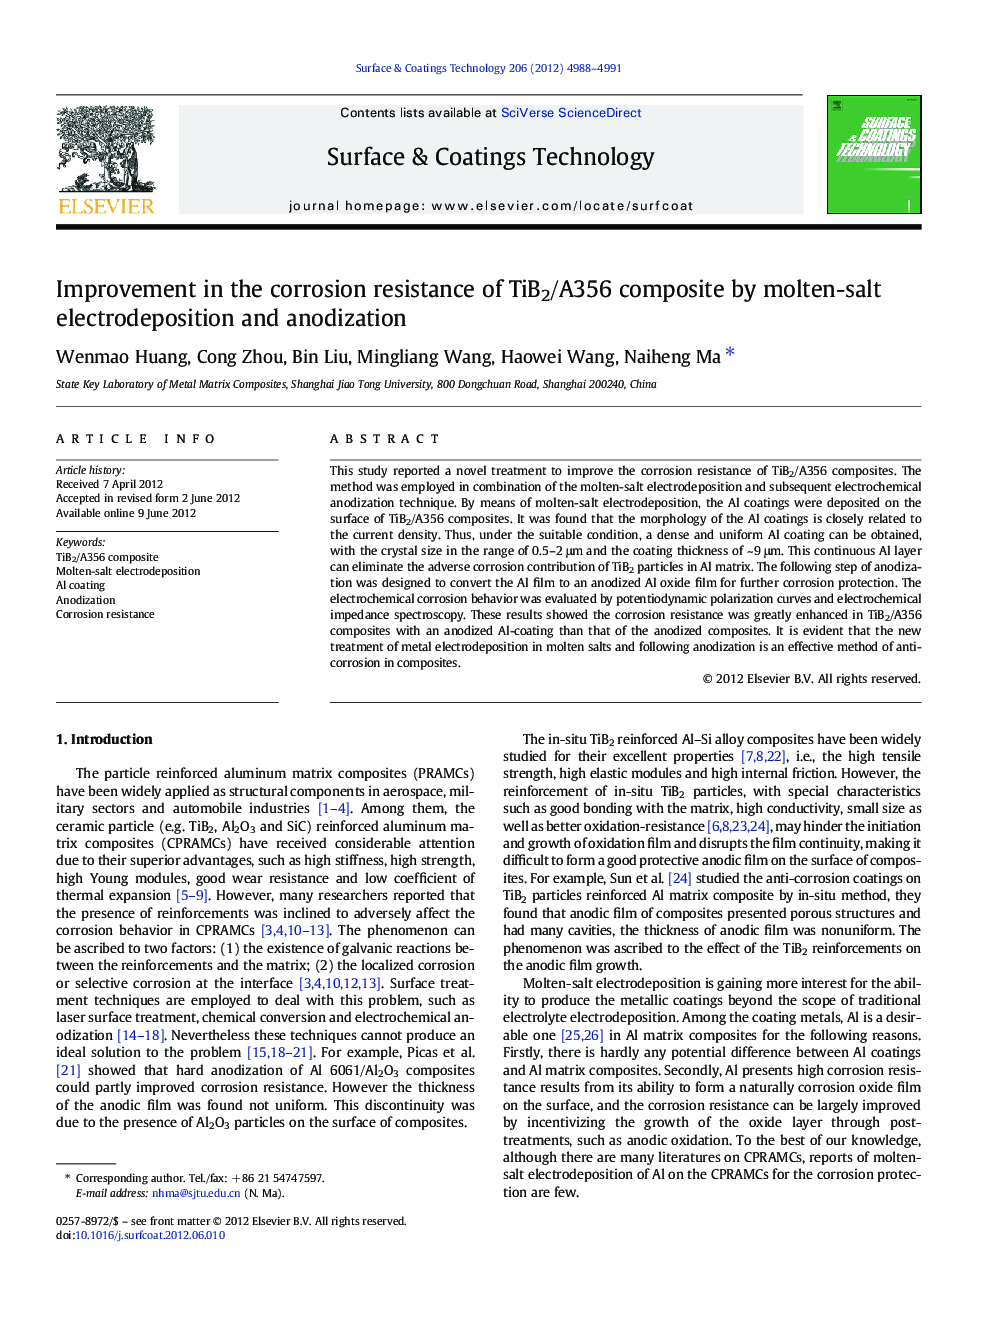 Improvement in the corrosion resistance of TiB2/A356 composite by molten-salt electrodeposition and anodization